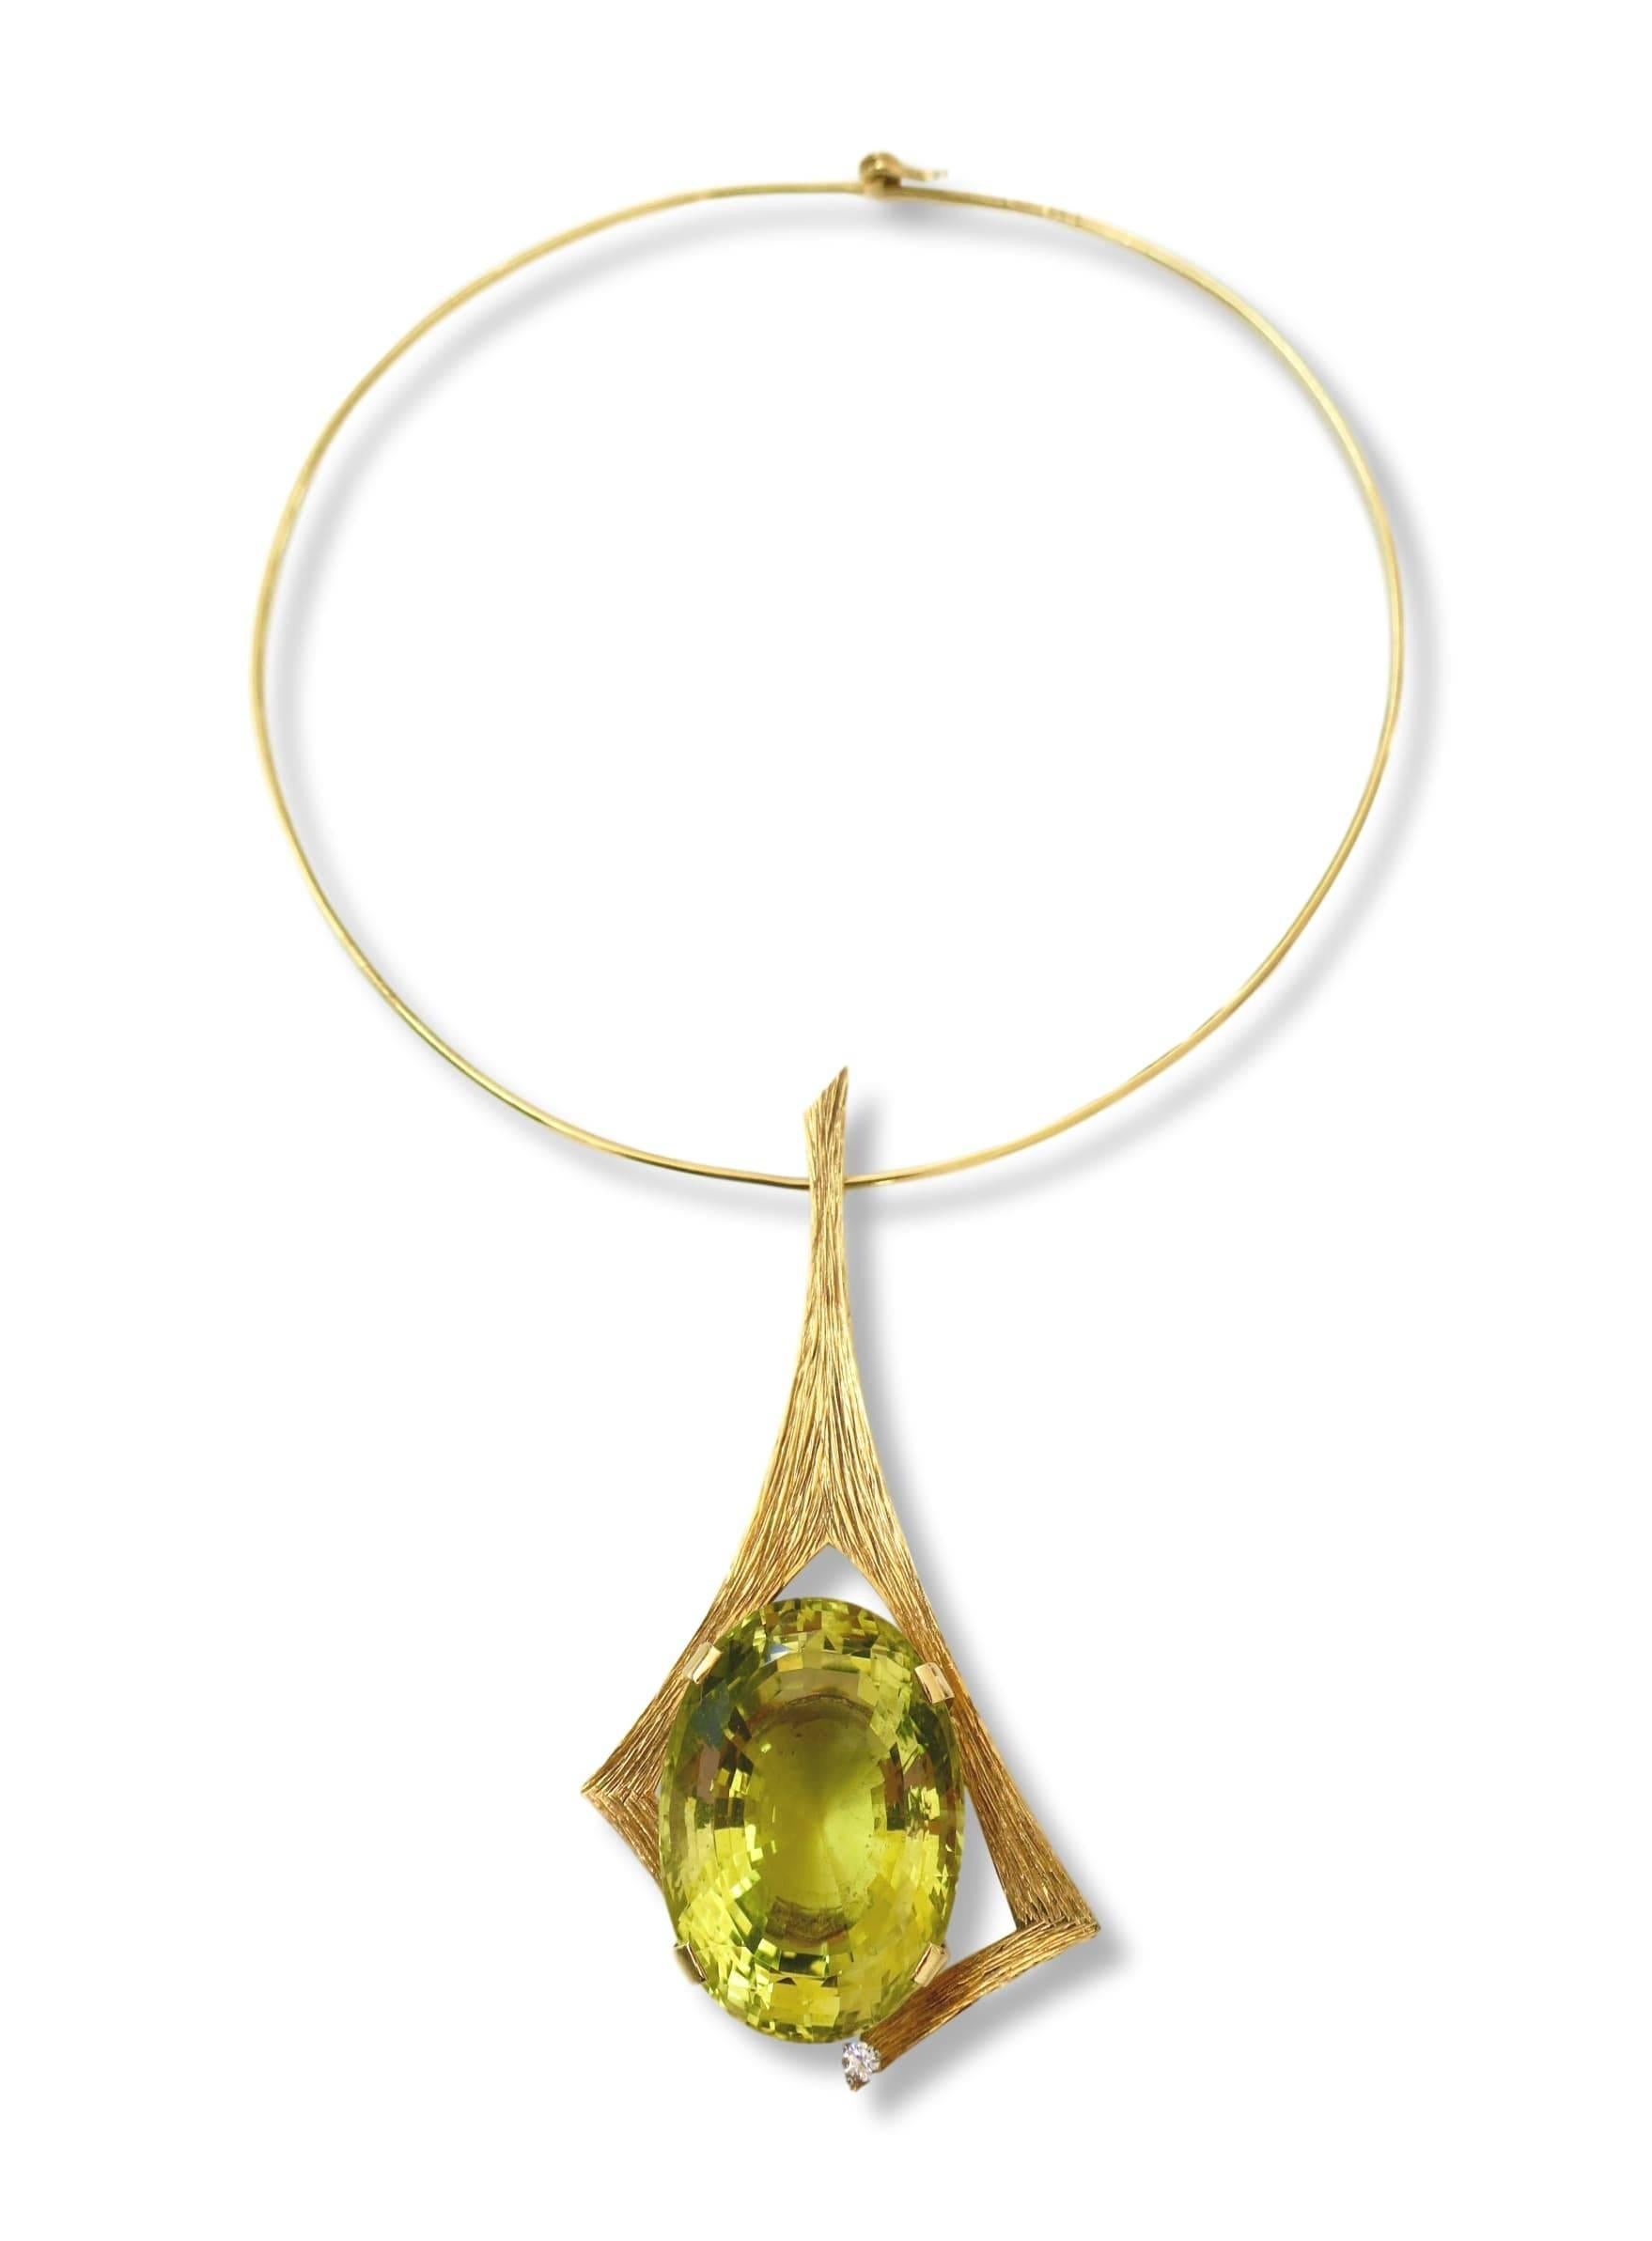 Modernist 172 carat bright yellow lemon quartz pendant necklace by British designer Andrew Grima. The 18k 3 3/4 x 1 6/8 engraved yellow gold mount with an impressive bright yellow mixed-cut citrine enhanced by a small round white diamond, suspended